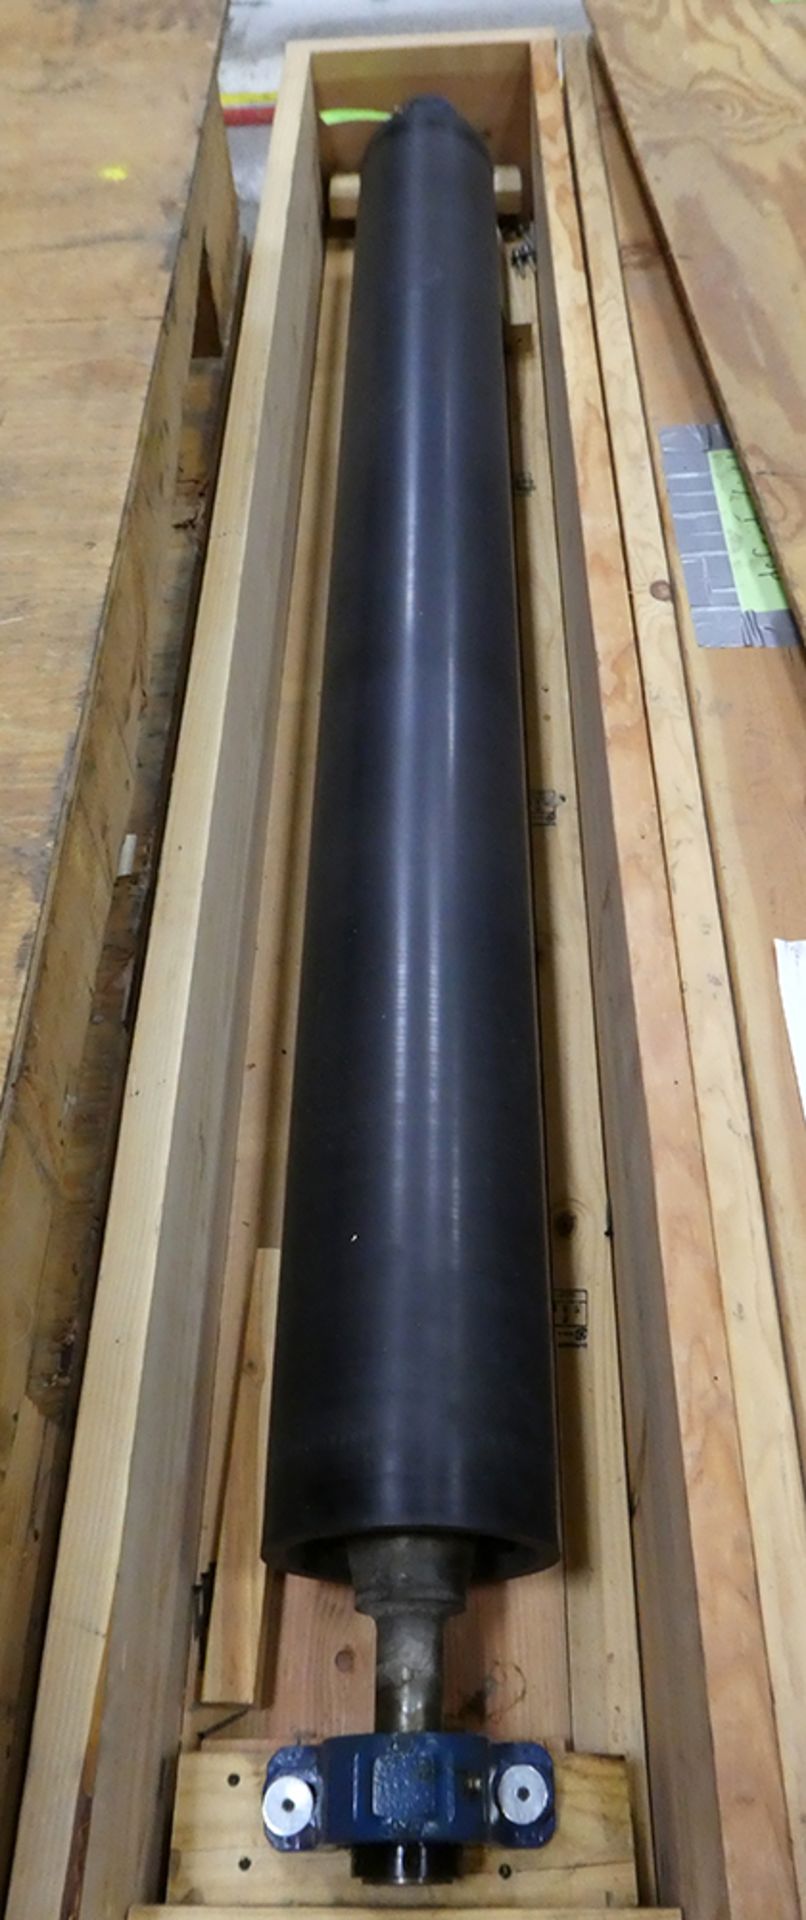 76" x 8" Diameter Rubber-Covered Roll - Image 2 of 2